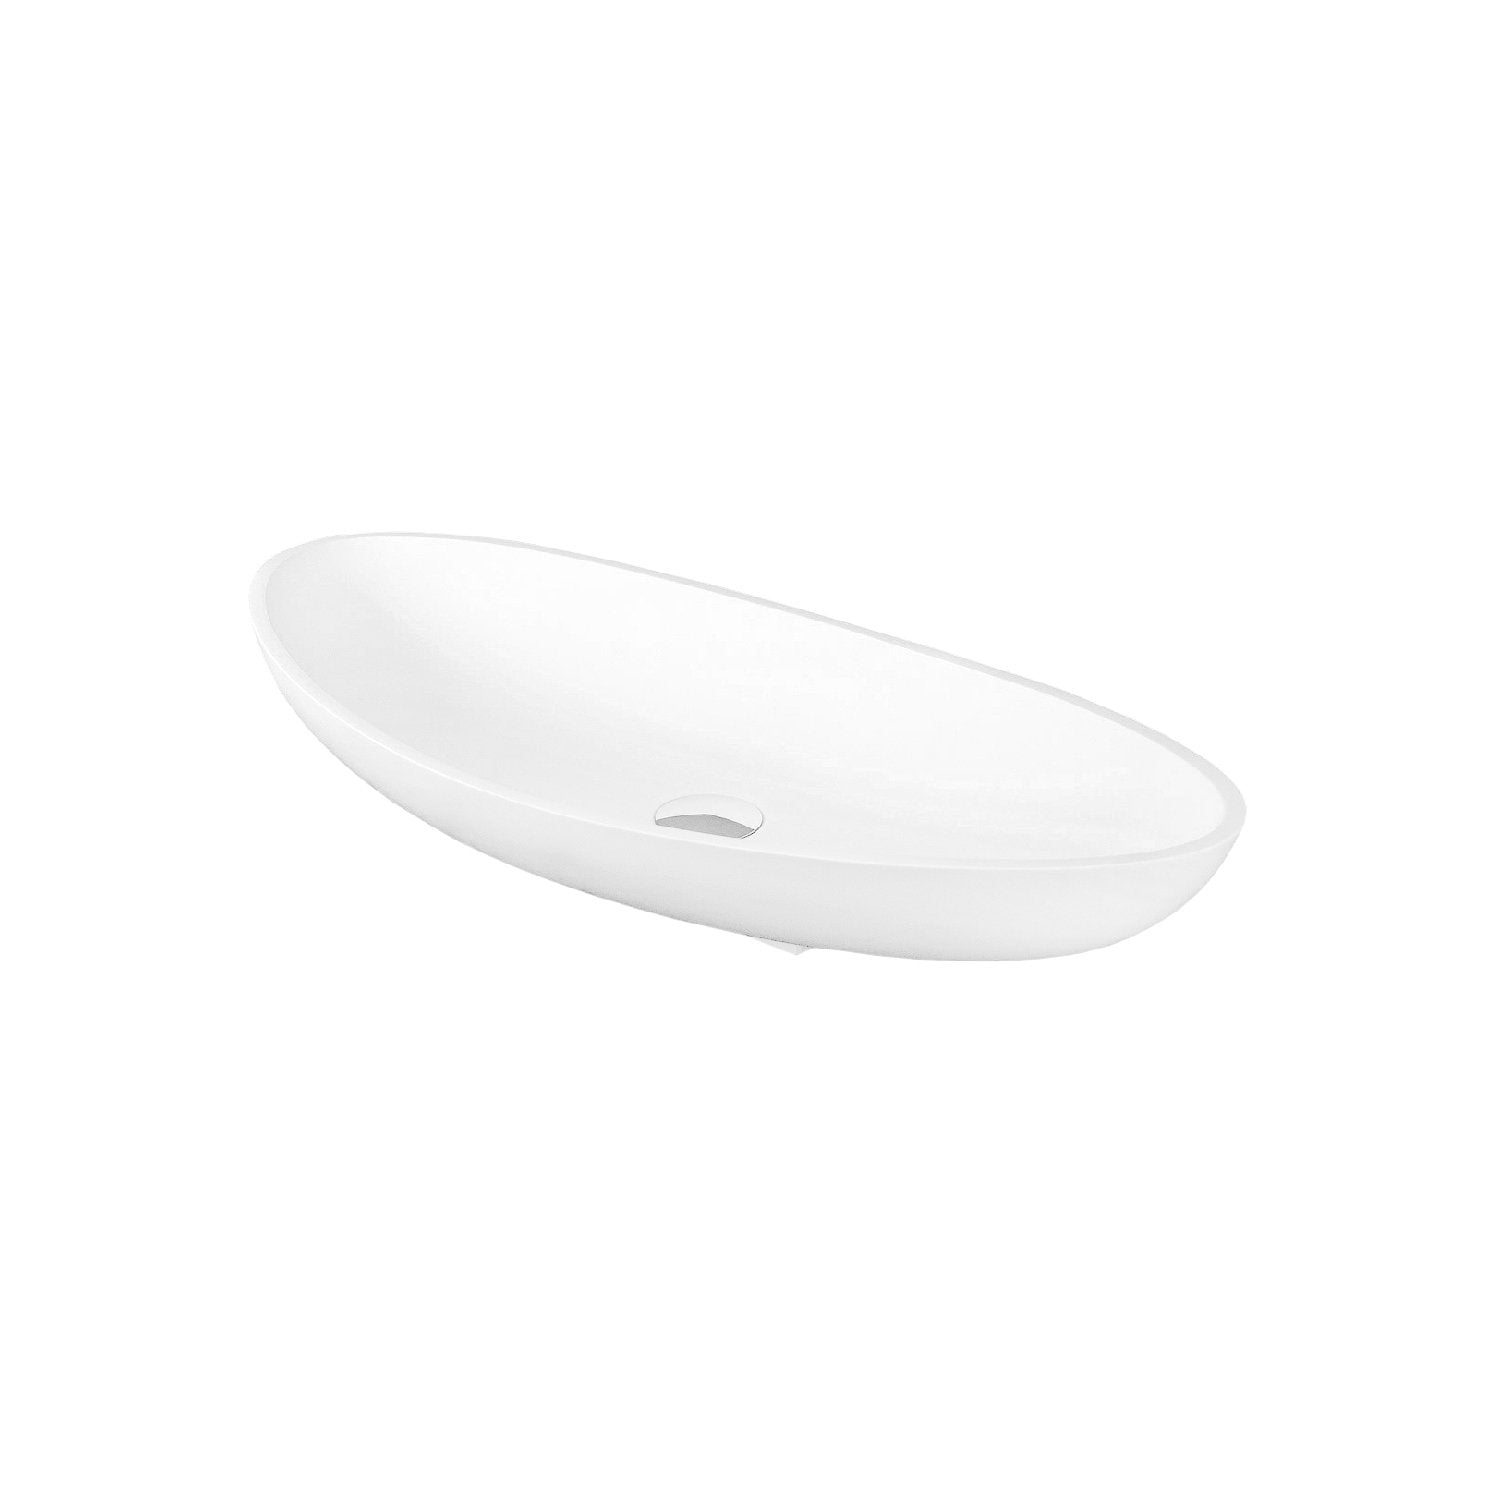 DAX Solid Surface Oval Single Bowl Bathroom Vessel Sink, White Matte Finish, 27-3/8 x 13-1/5 x 4-3/4 Inches (DAX-AB-1302)